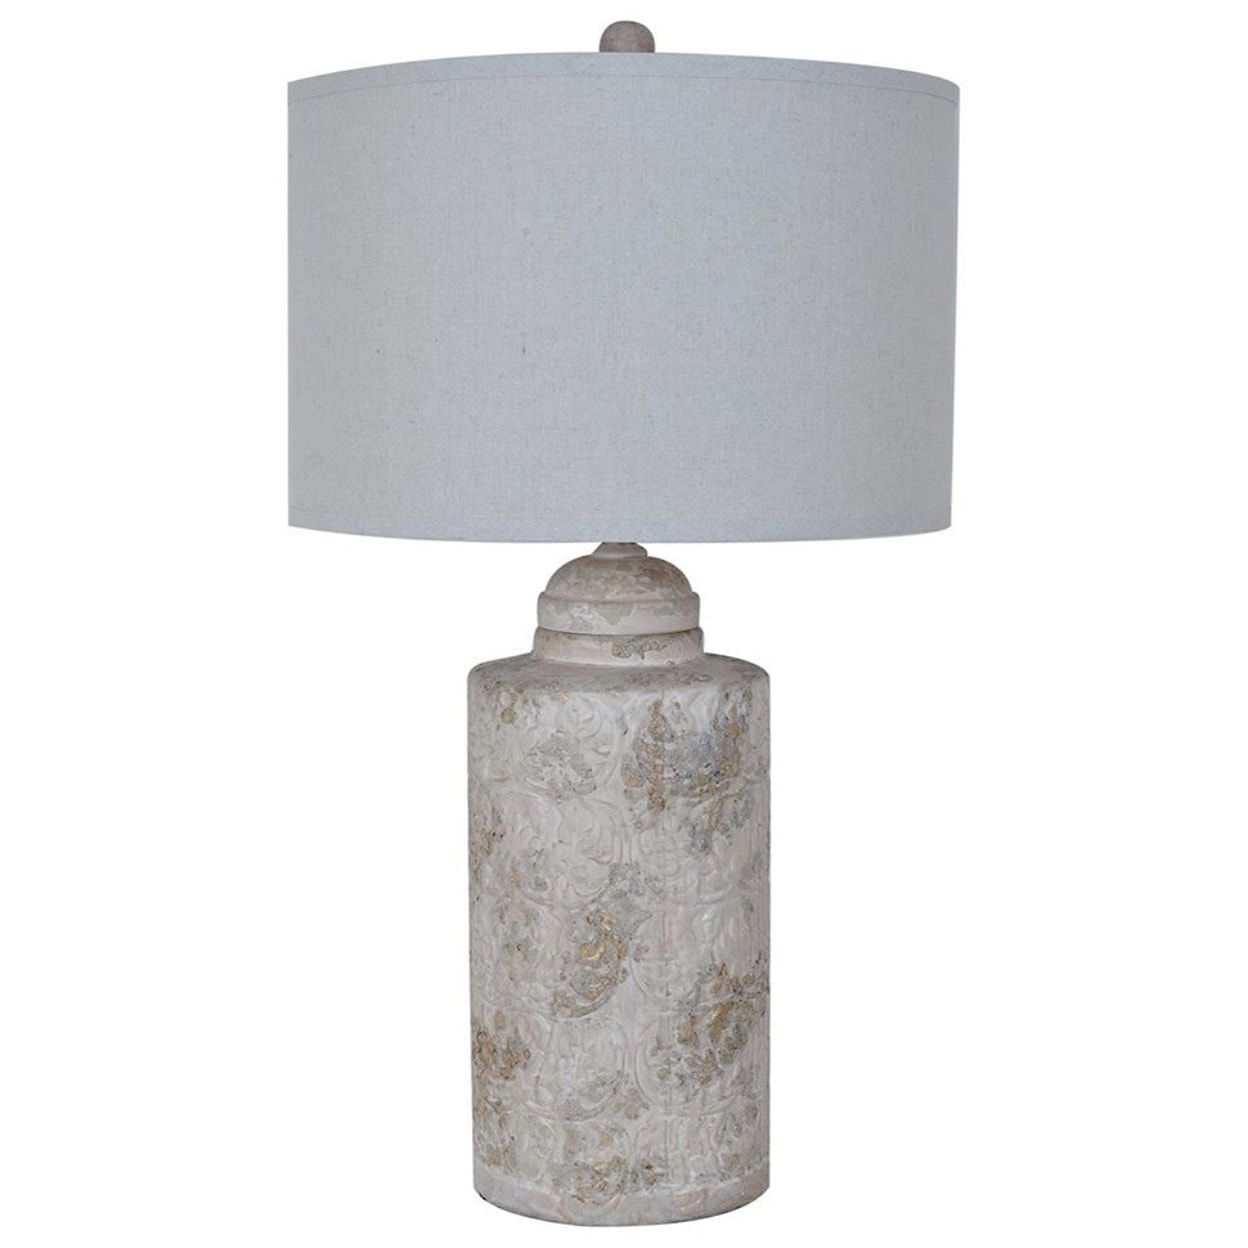 Crestview Collection Lighting Camden Canister Table Lamp